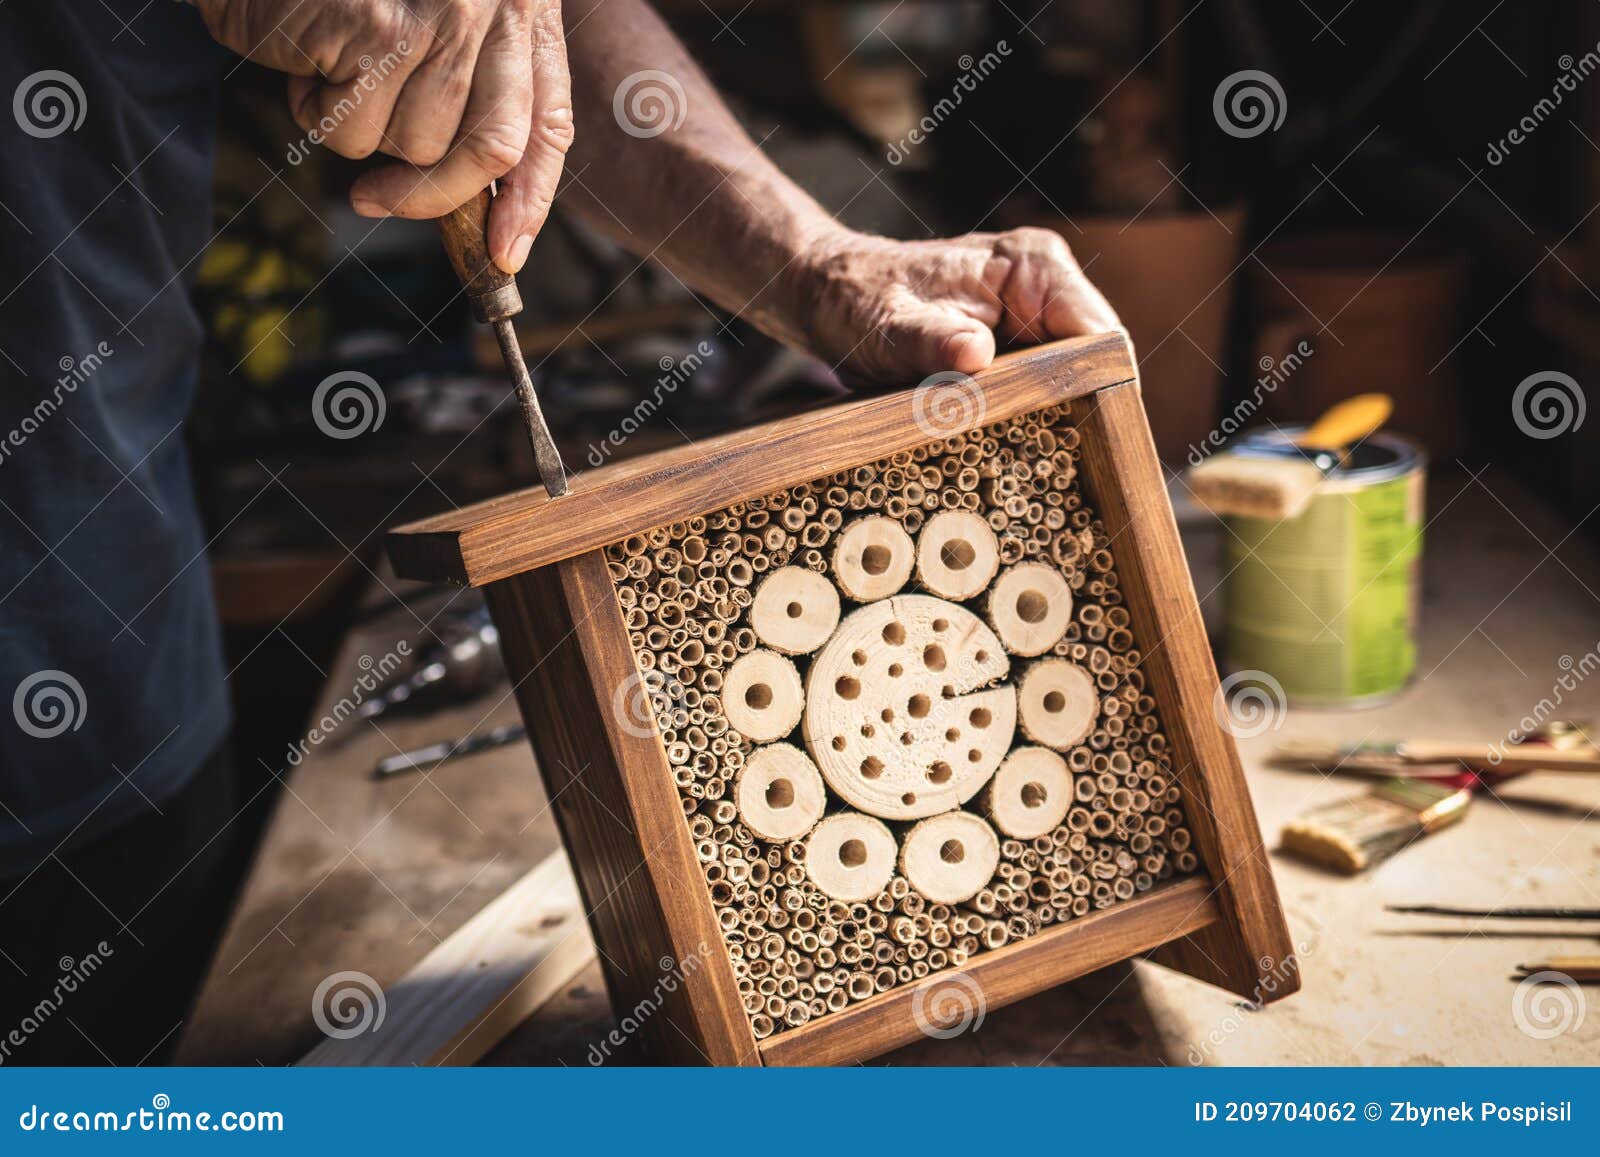 making wooden insect hotel in workshop